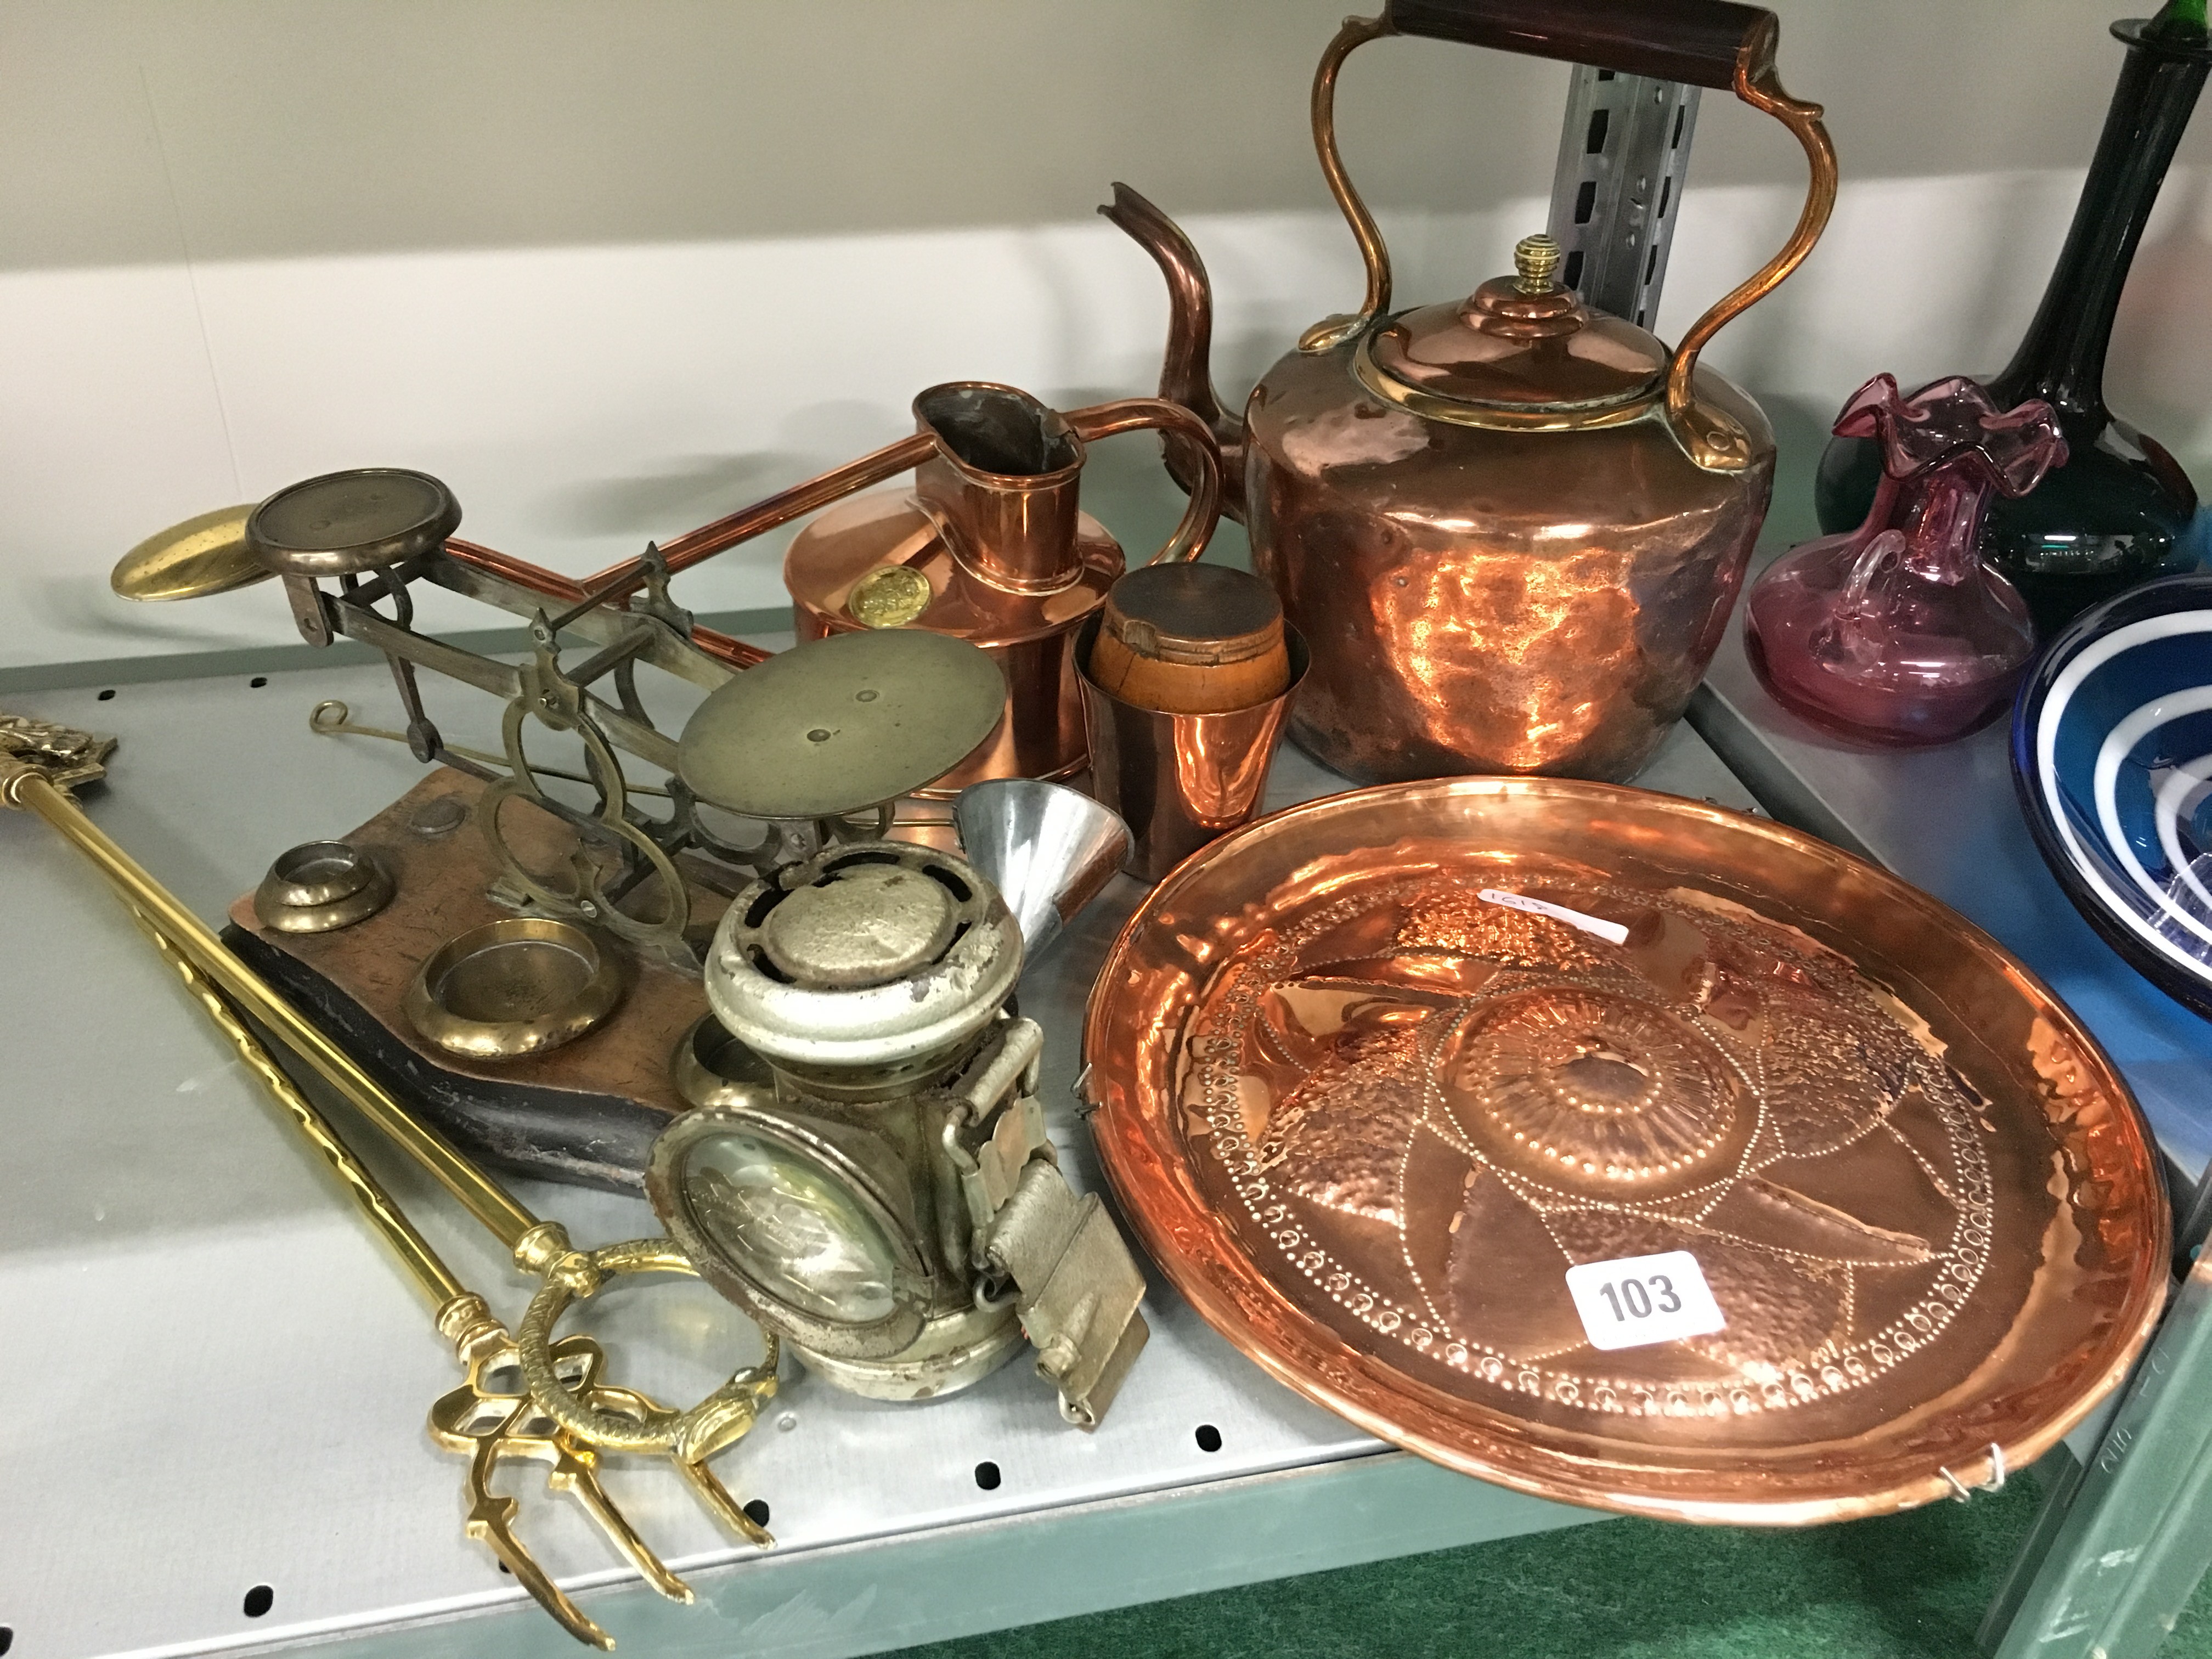 A collection of various copper items together with a set of postal scales.